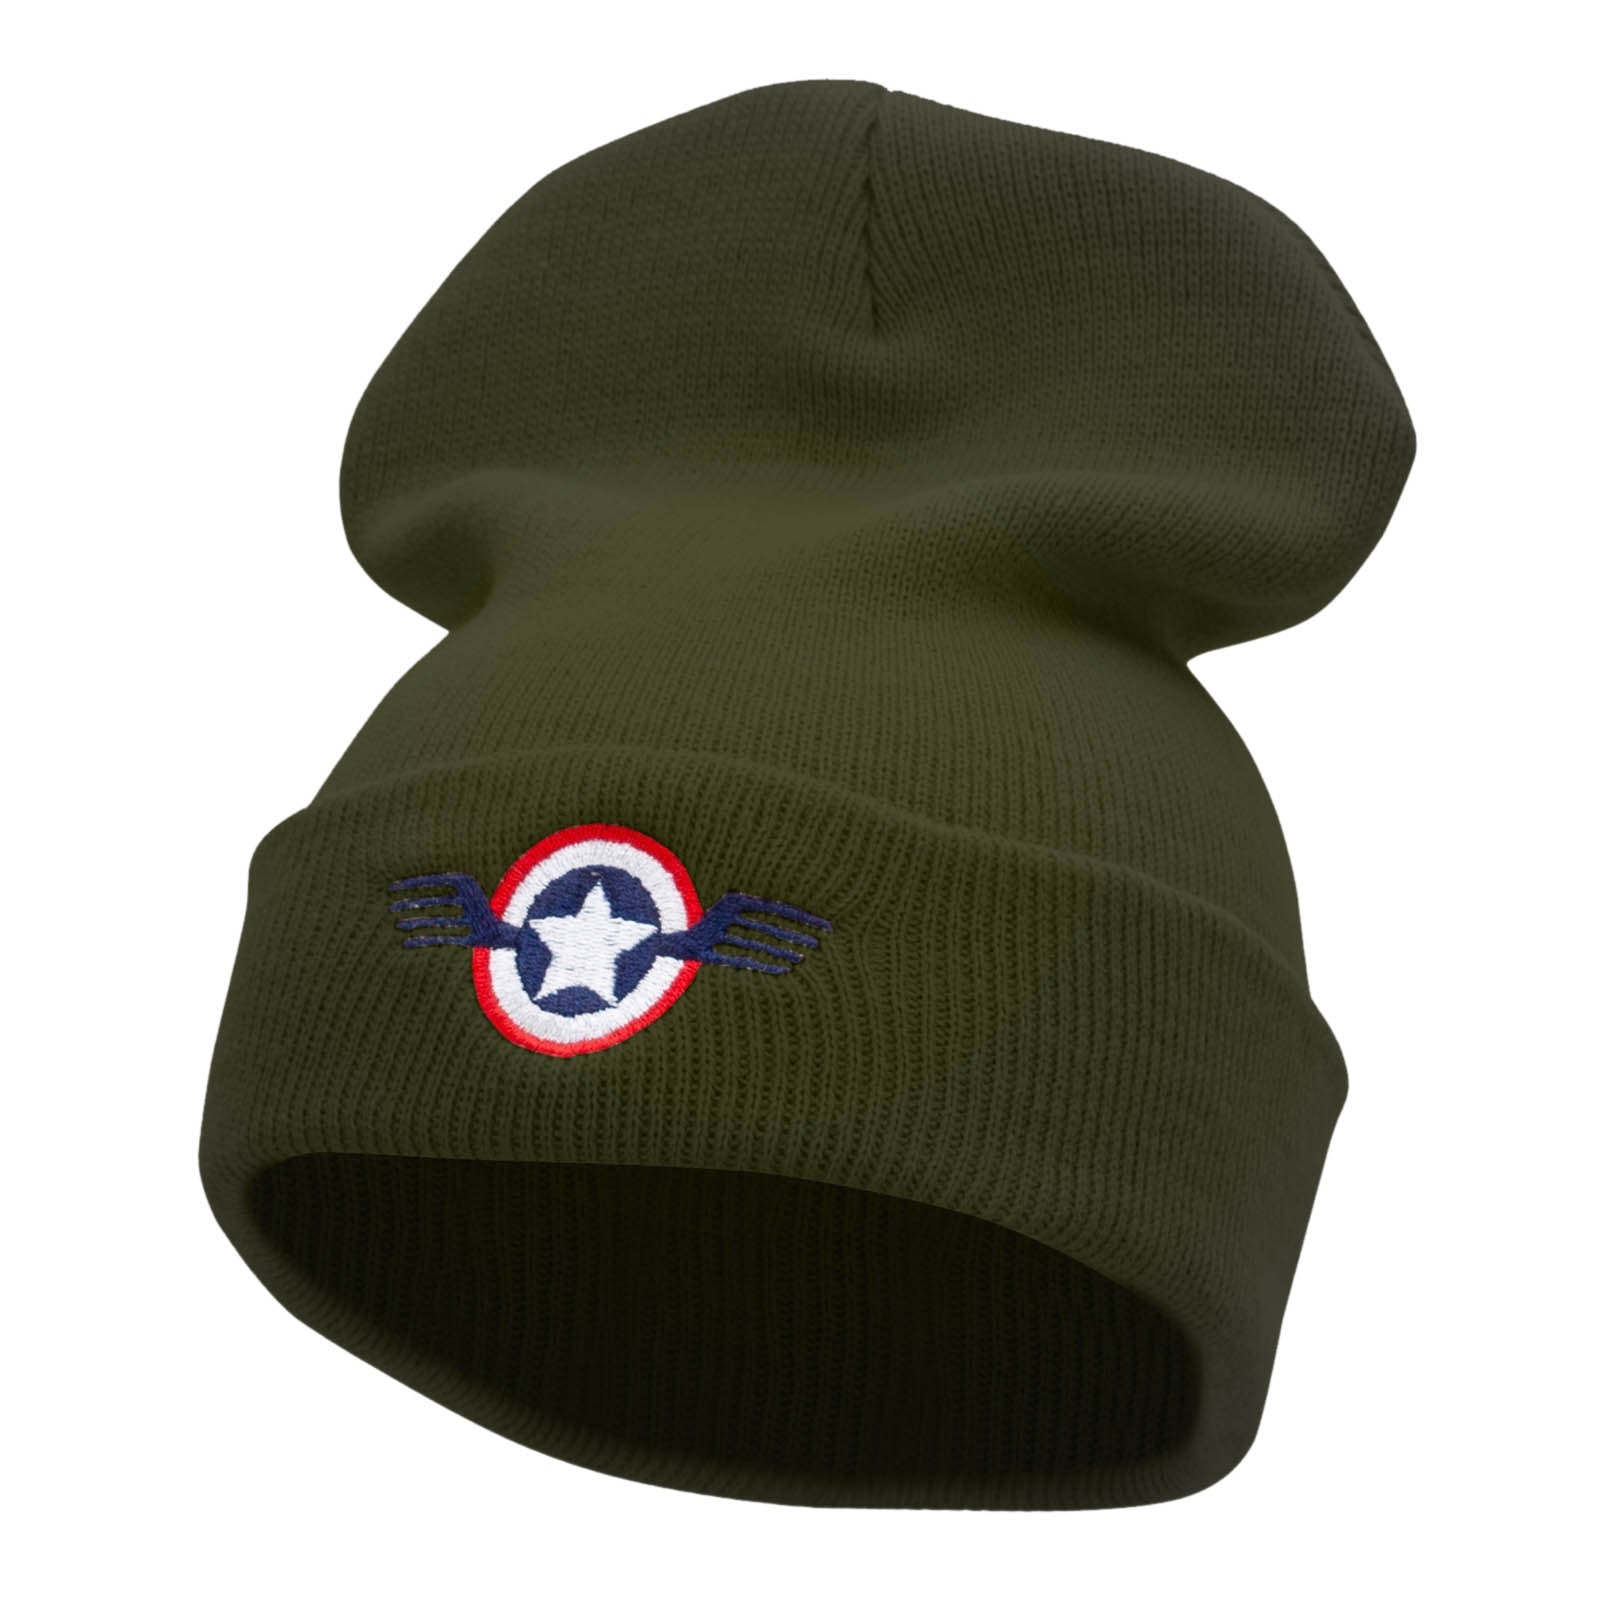 Flying USA Seal Embroidered 12 Inch Solid Long Beanie Made in USA - Olive OSFM